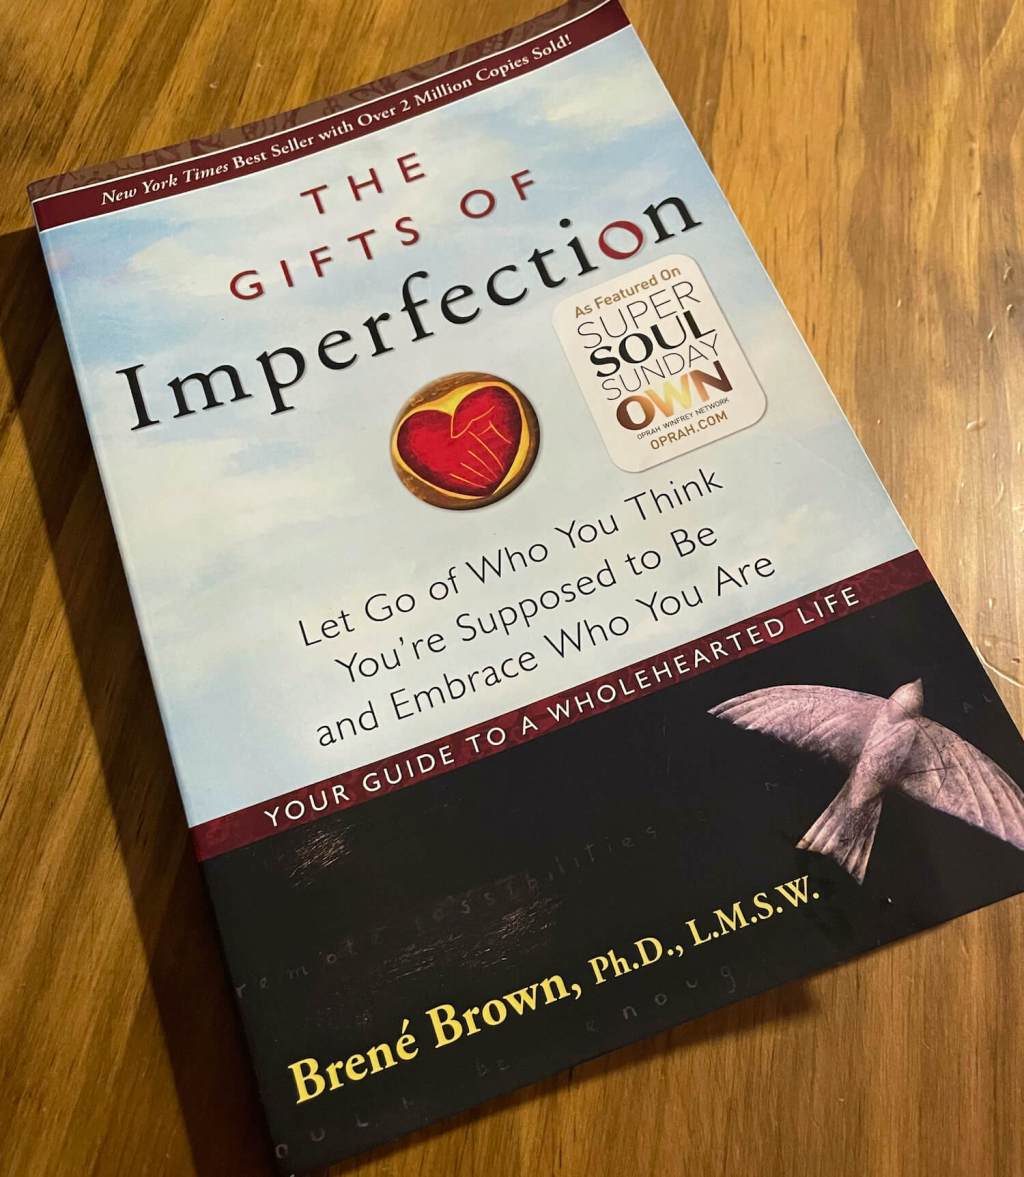 The Gifts of Imperfection by Brené Brown